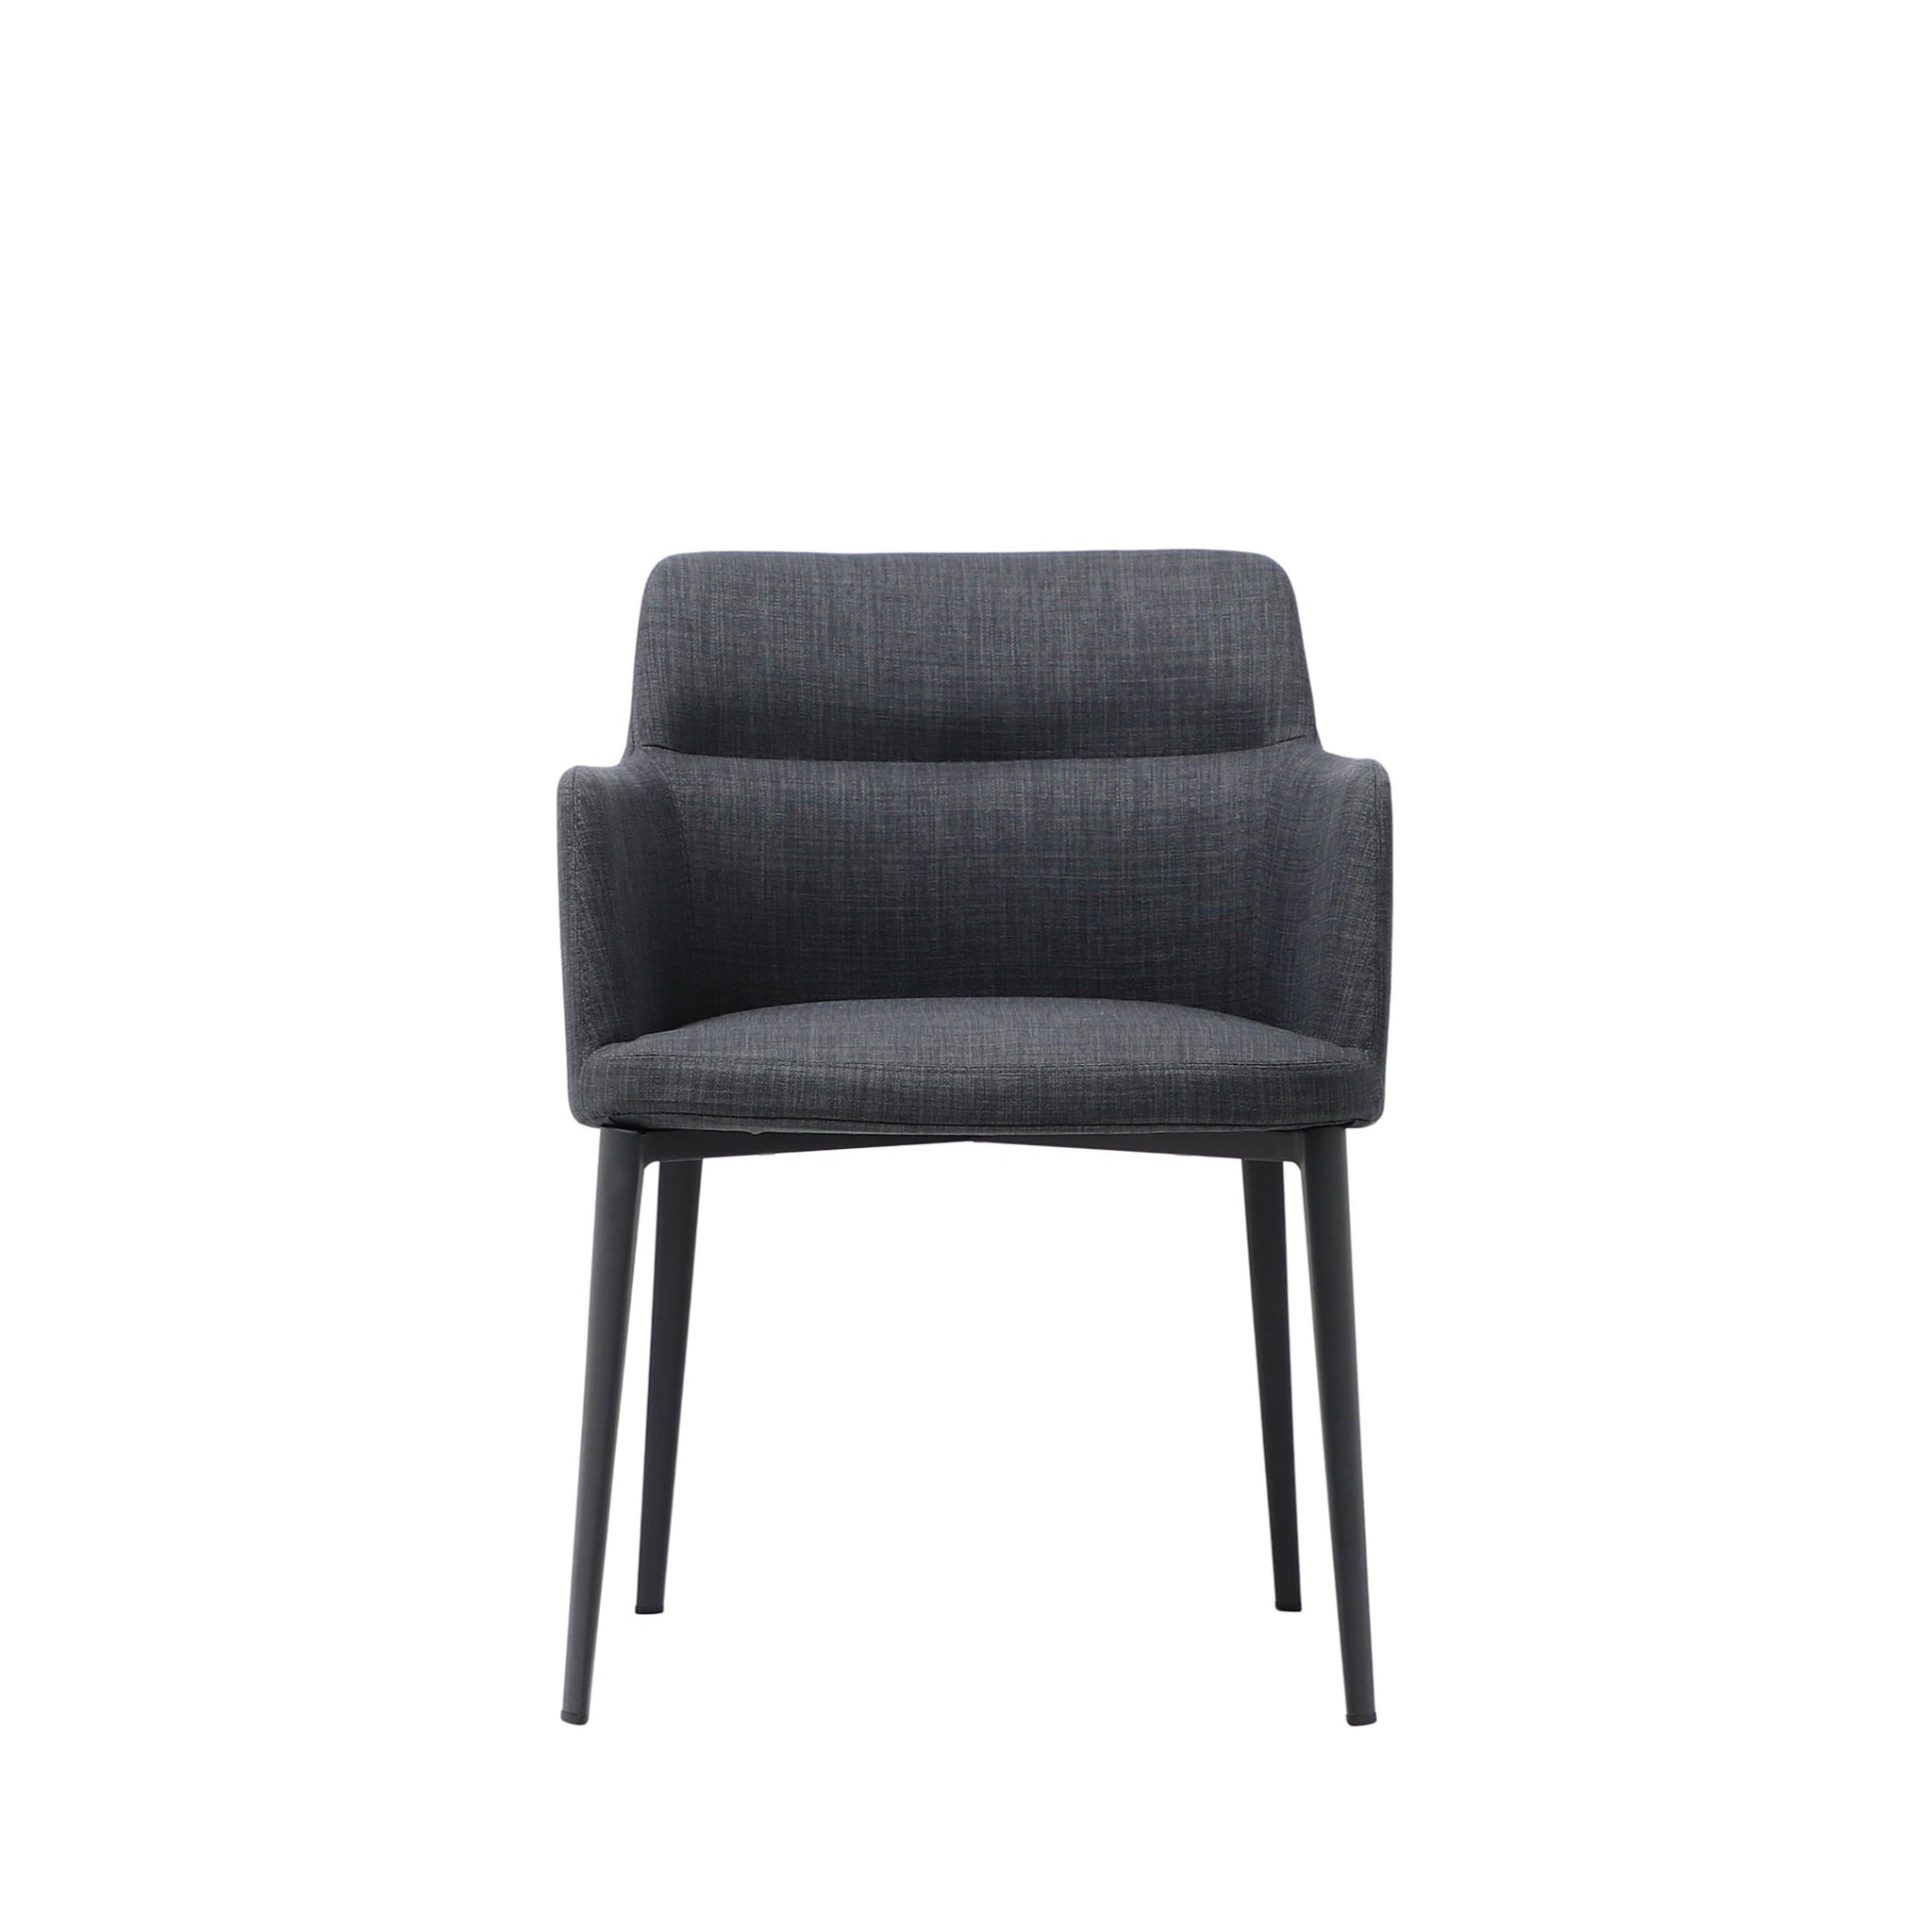 Miller Chair Charcoal Grey